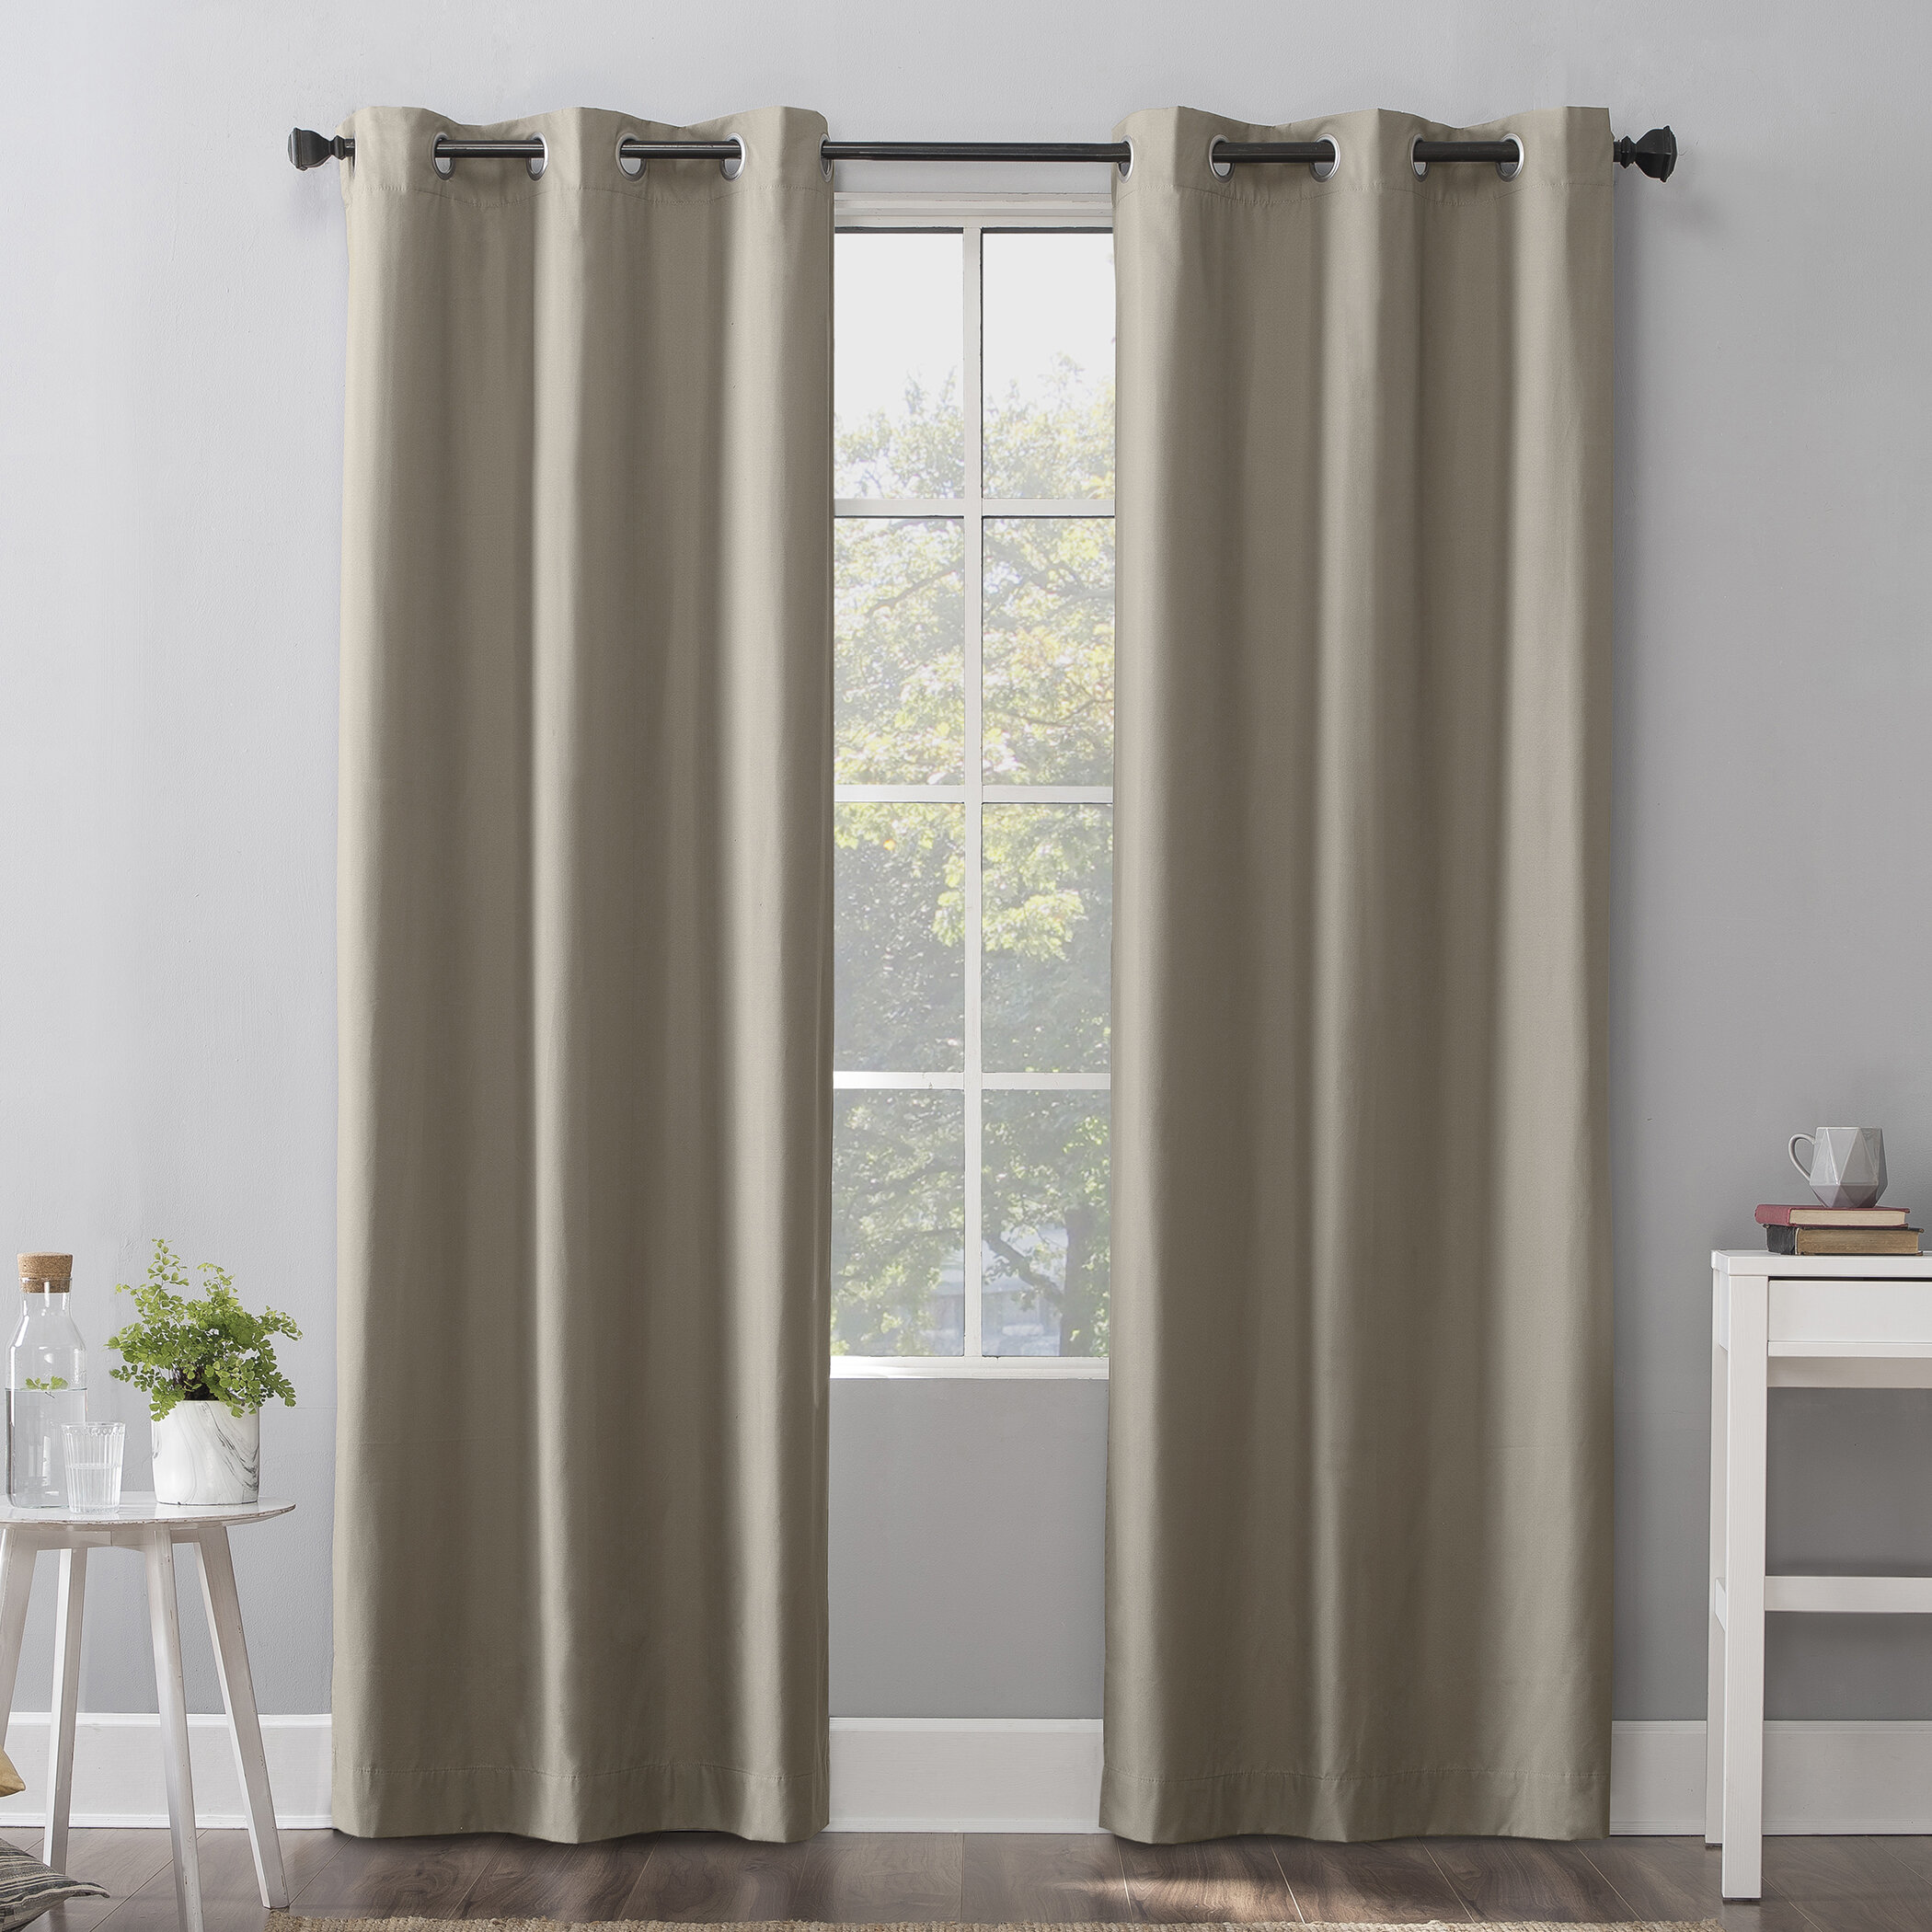 PAIR LUXURY HIGHLAND CHECK LINED RING TOP CURTAINS WITH BRUSHED FAUX WOOL EFFECT 